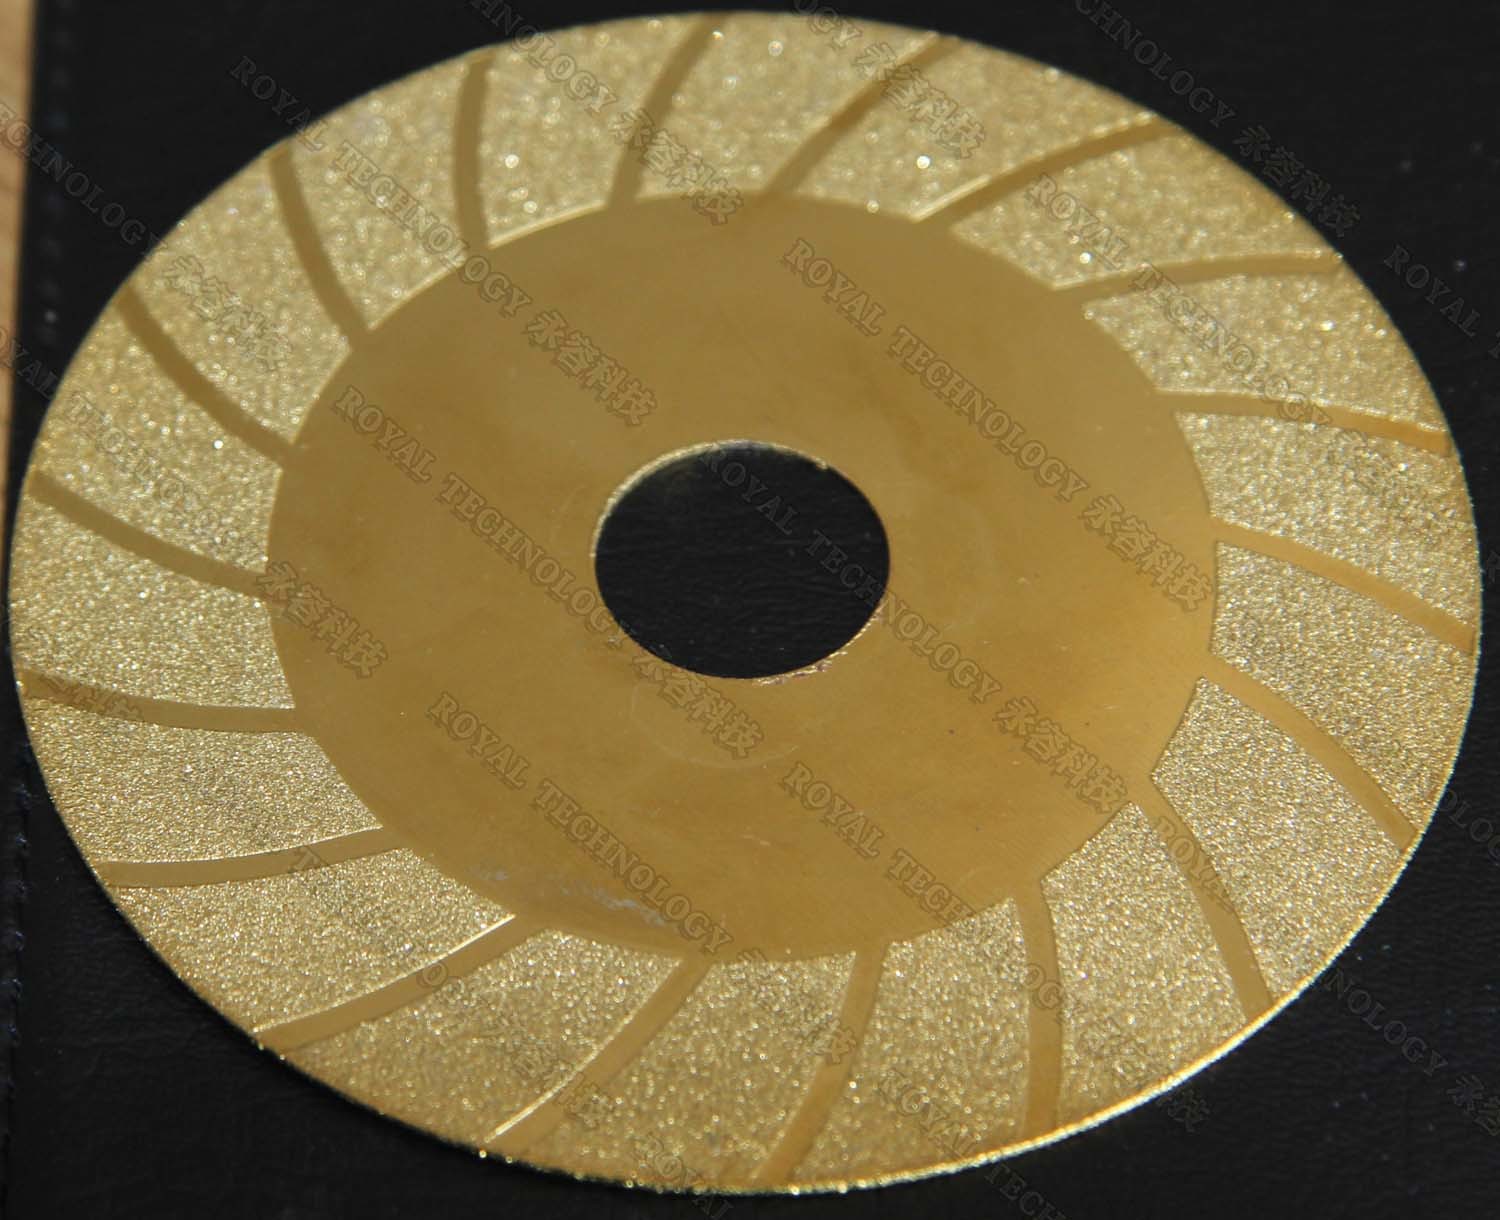 Steel Files and saws PVD Gold Coating Service,  Ceramic Sheets PVD Plating Service from China